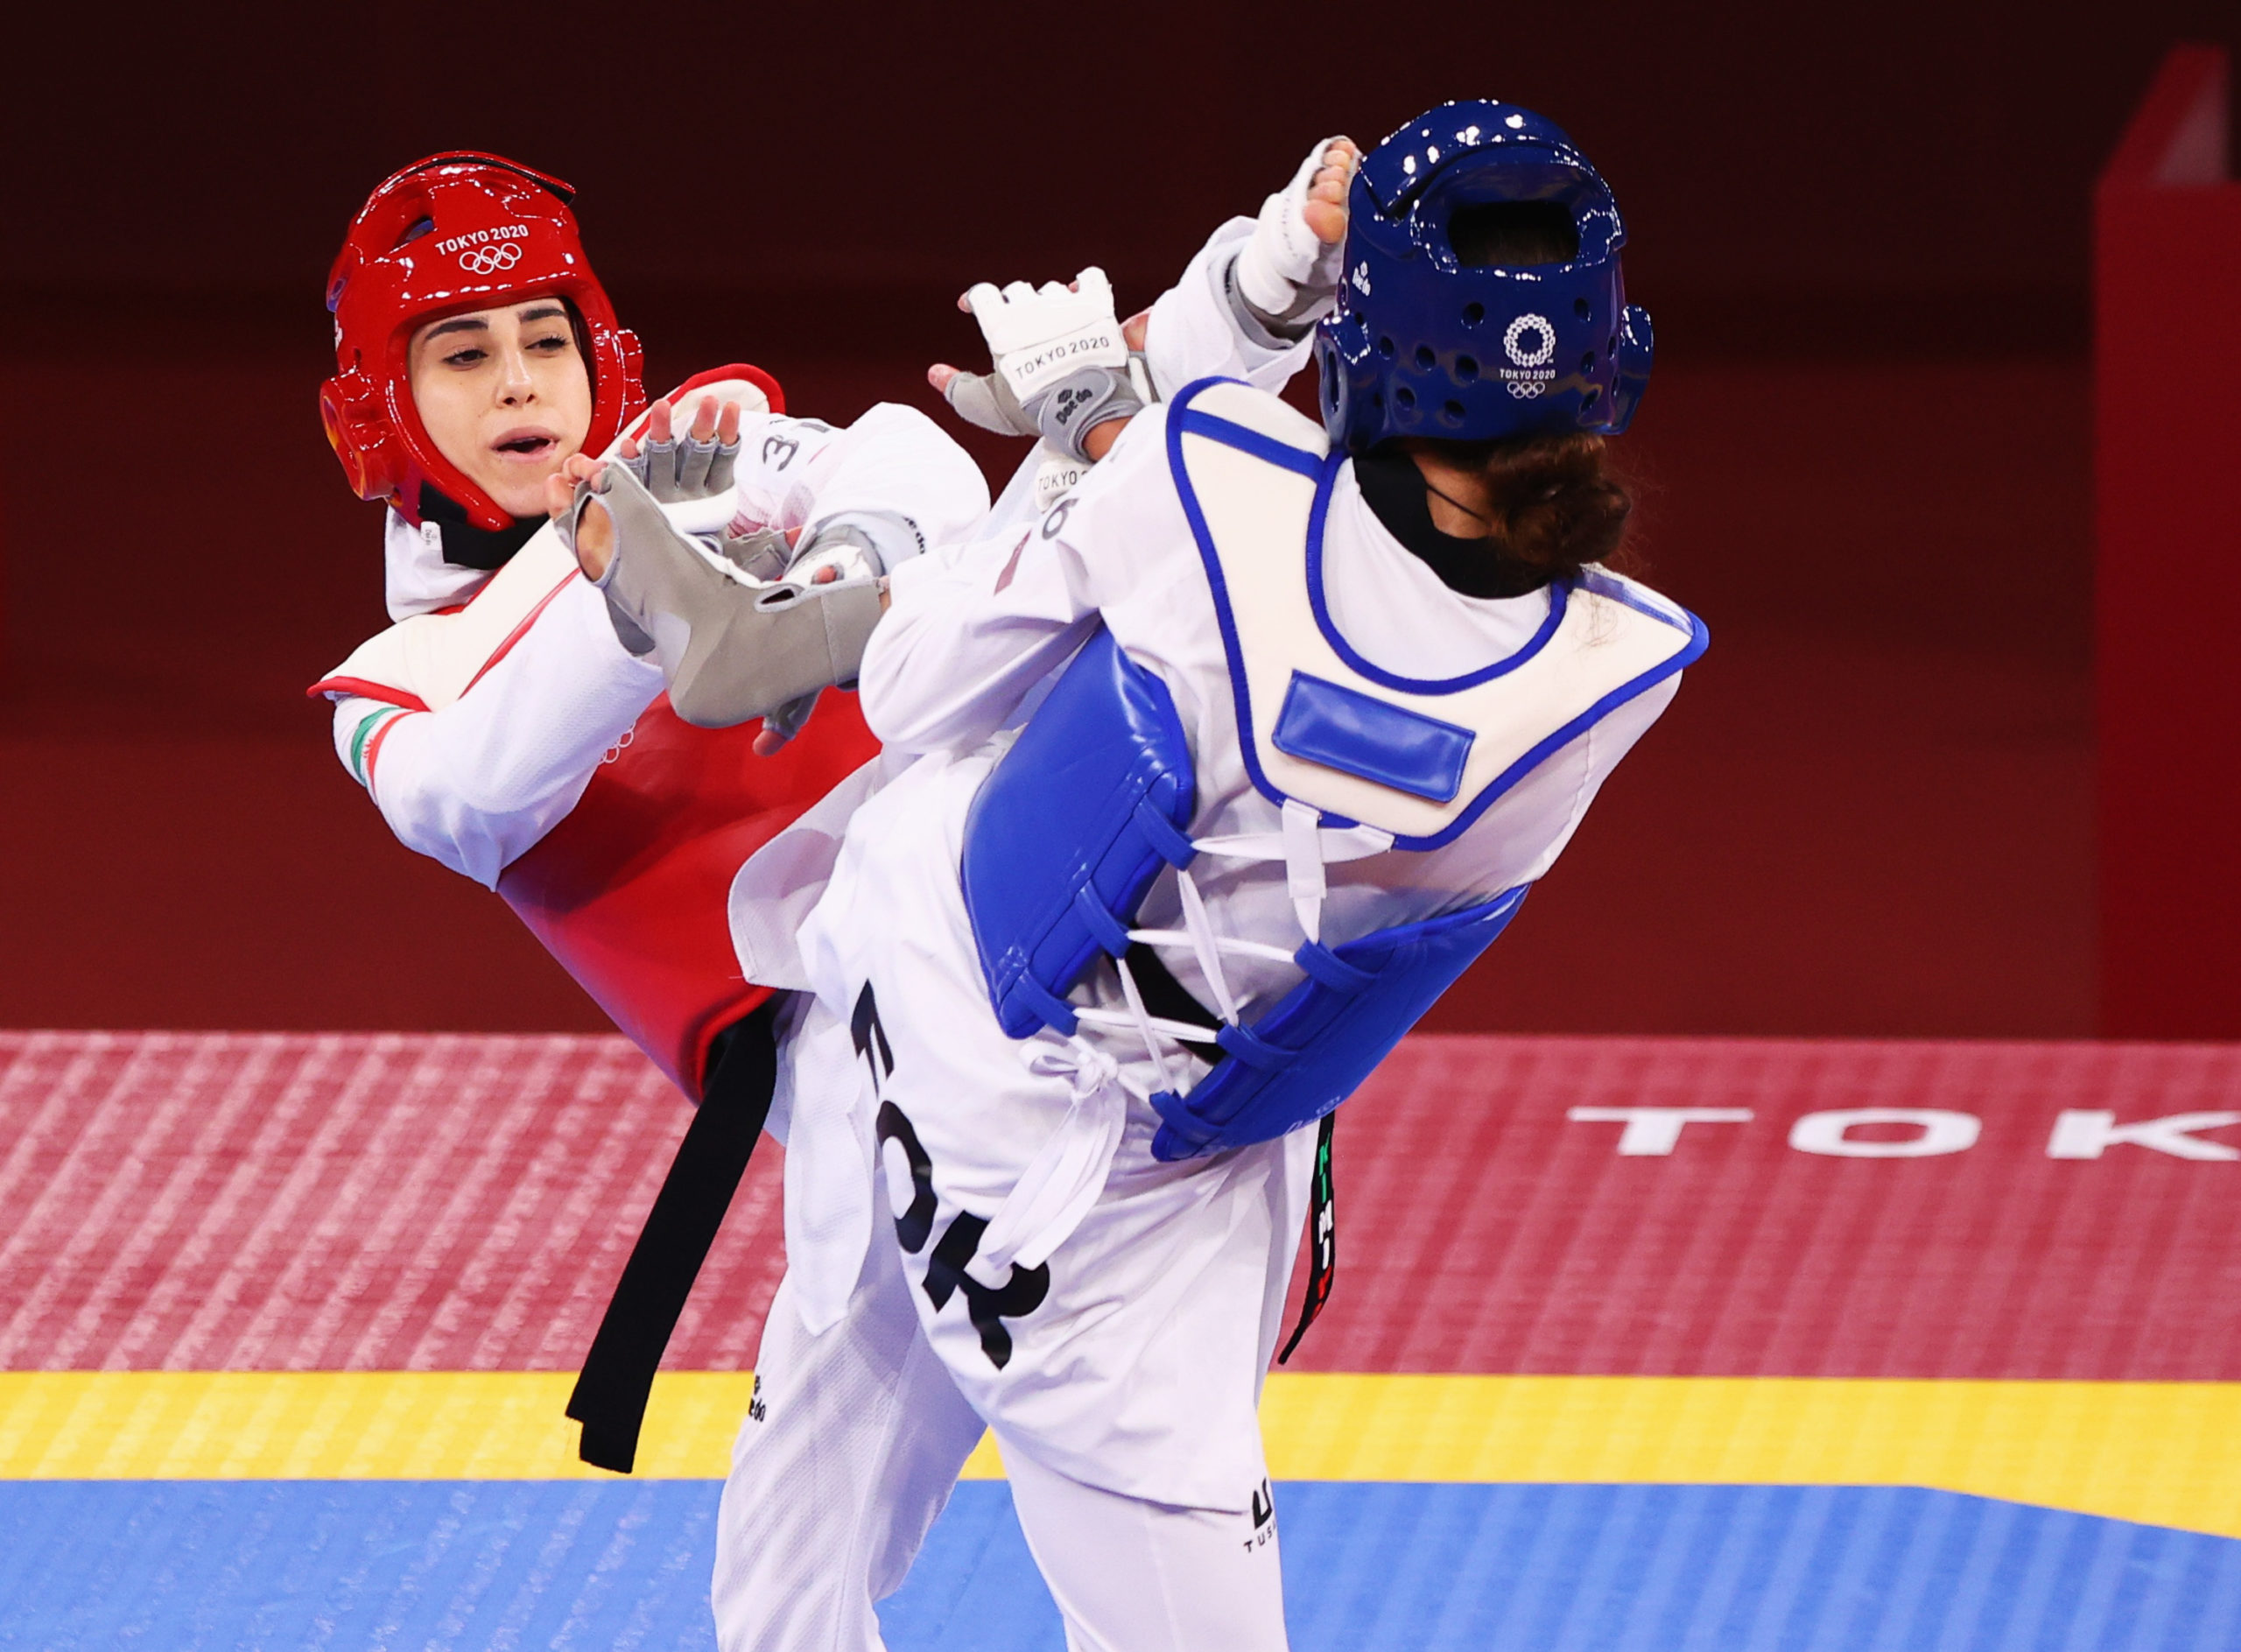 Kimia Alizadeh of the Refugee Olympic Team in action against Nahid Kiyanichandeh of Iran 